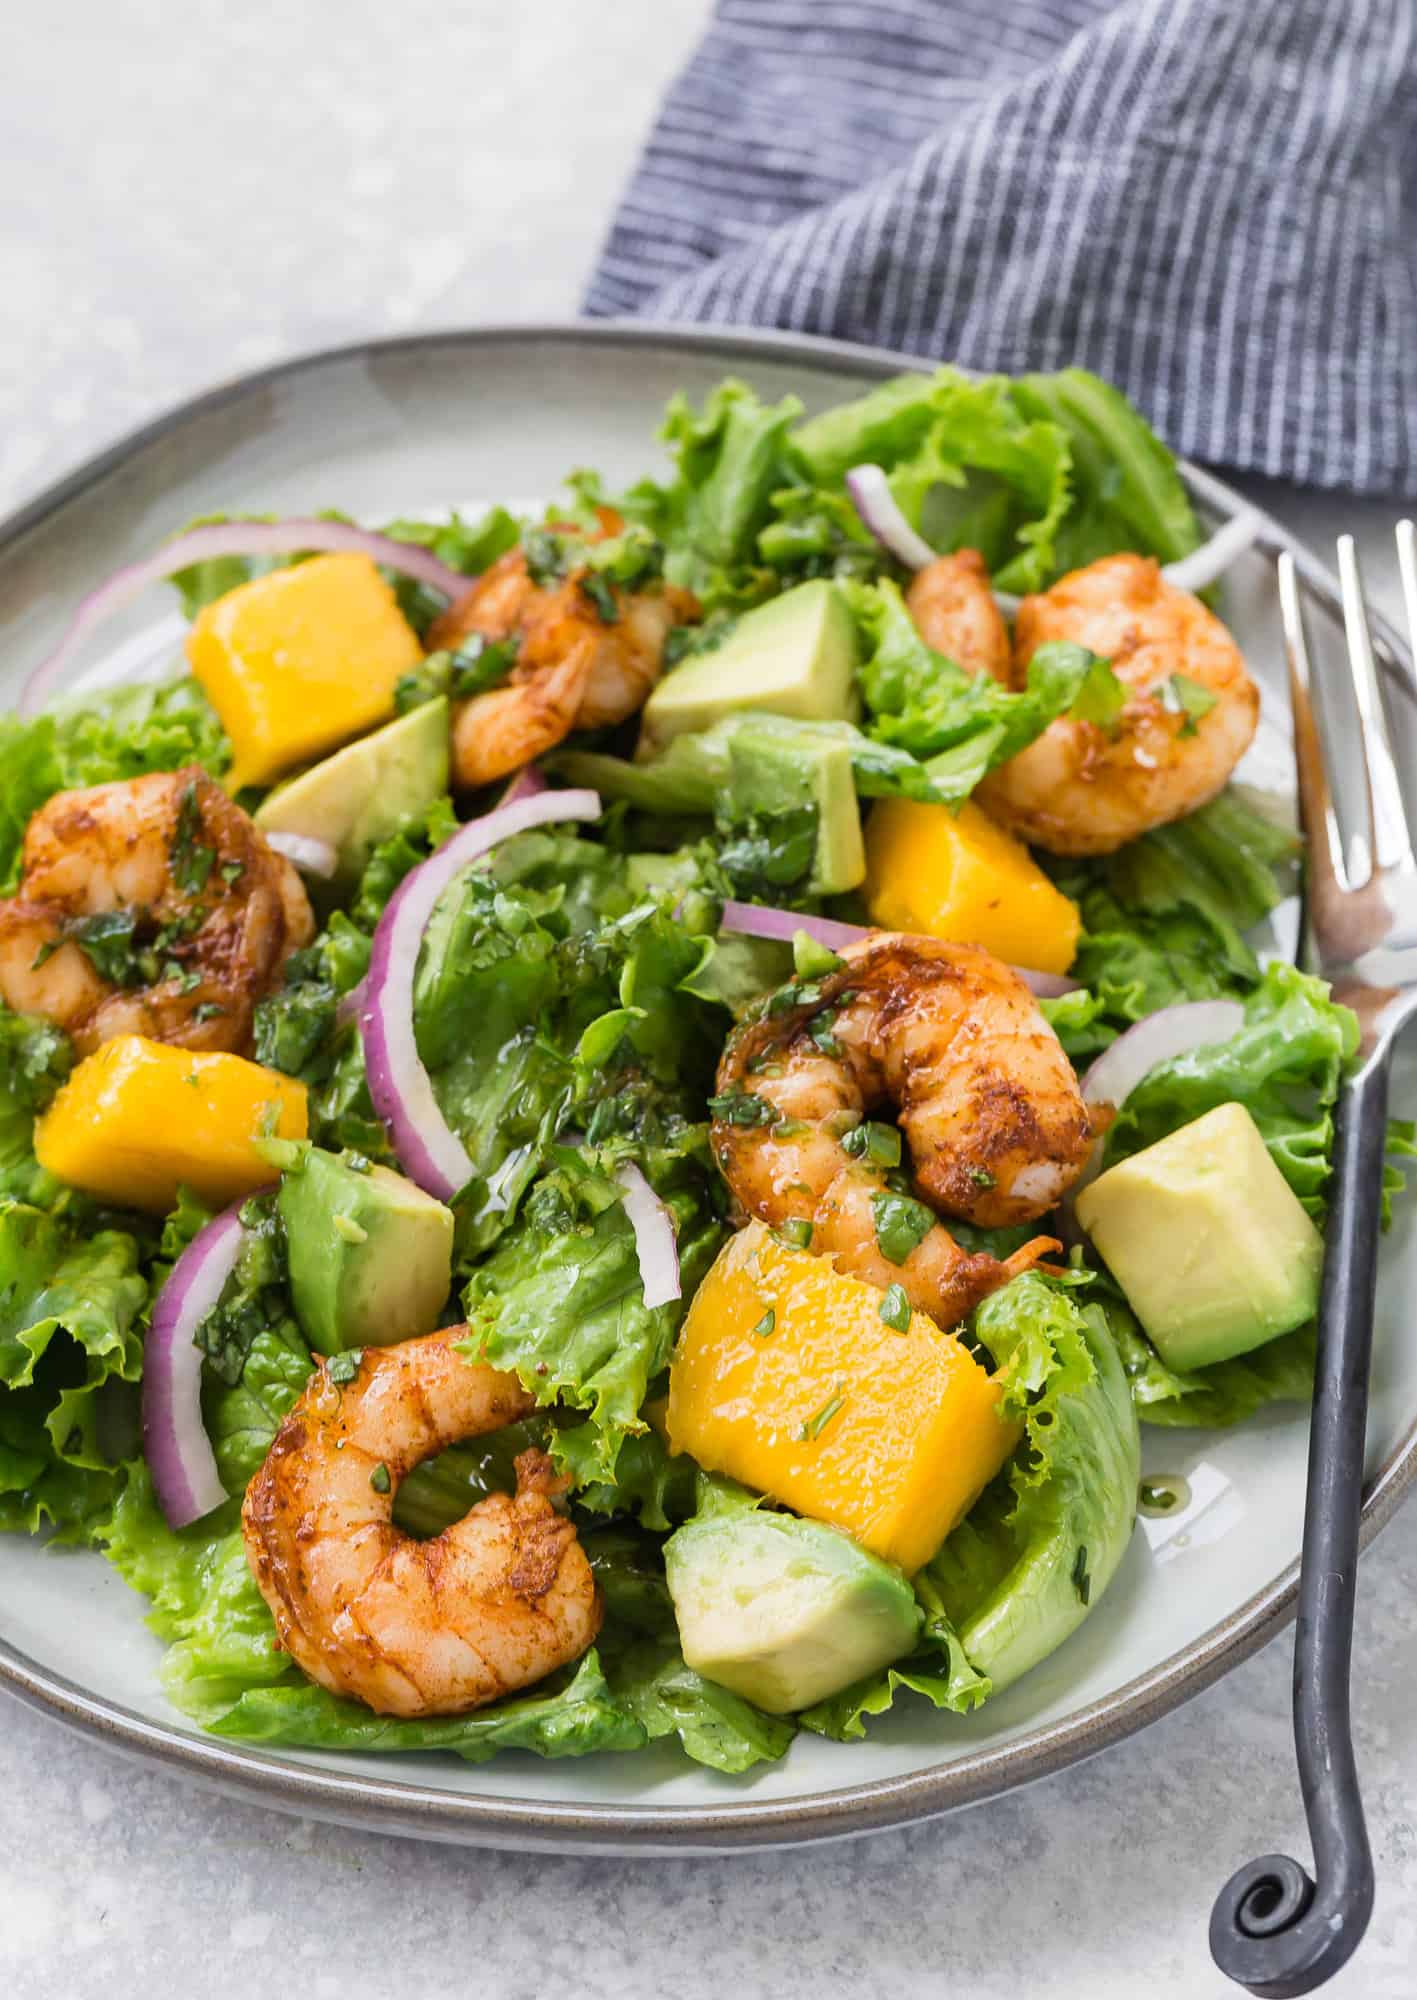 Shrimp salad with mango, avocado, red onion on a grey plate with a black fork.